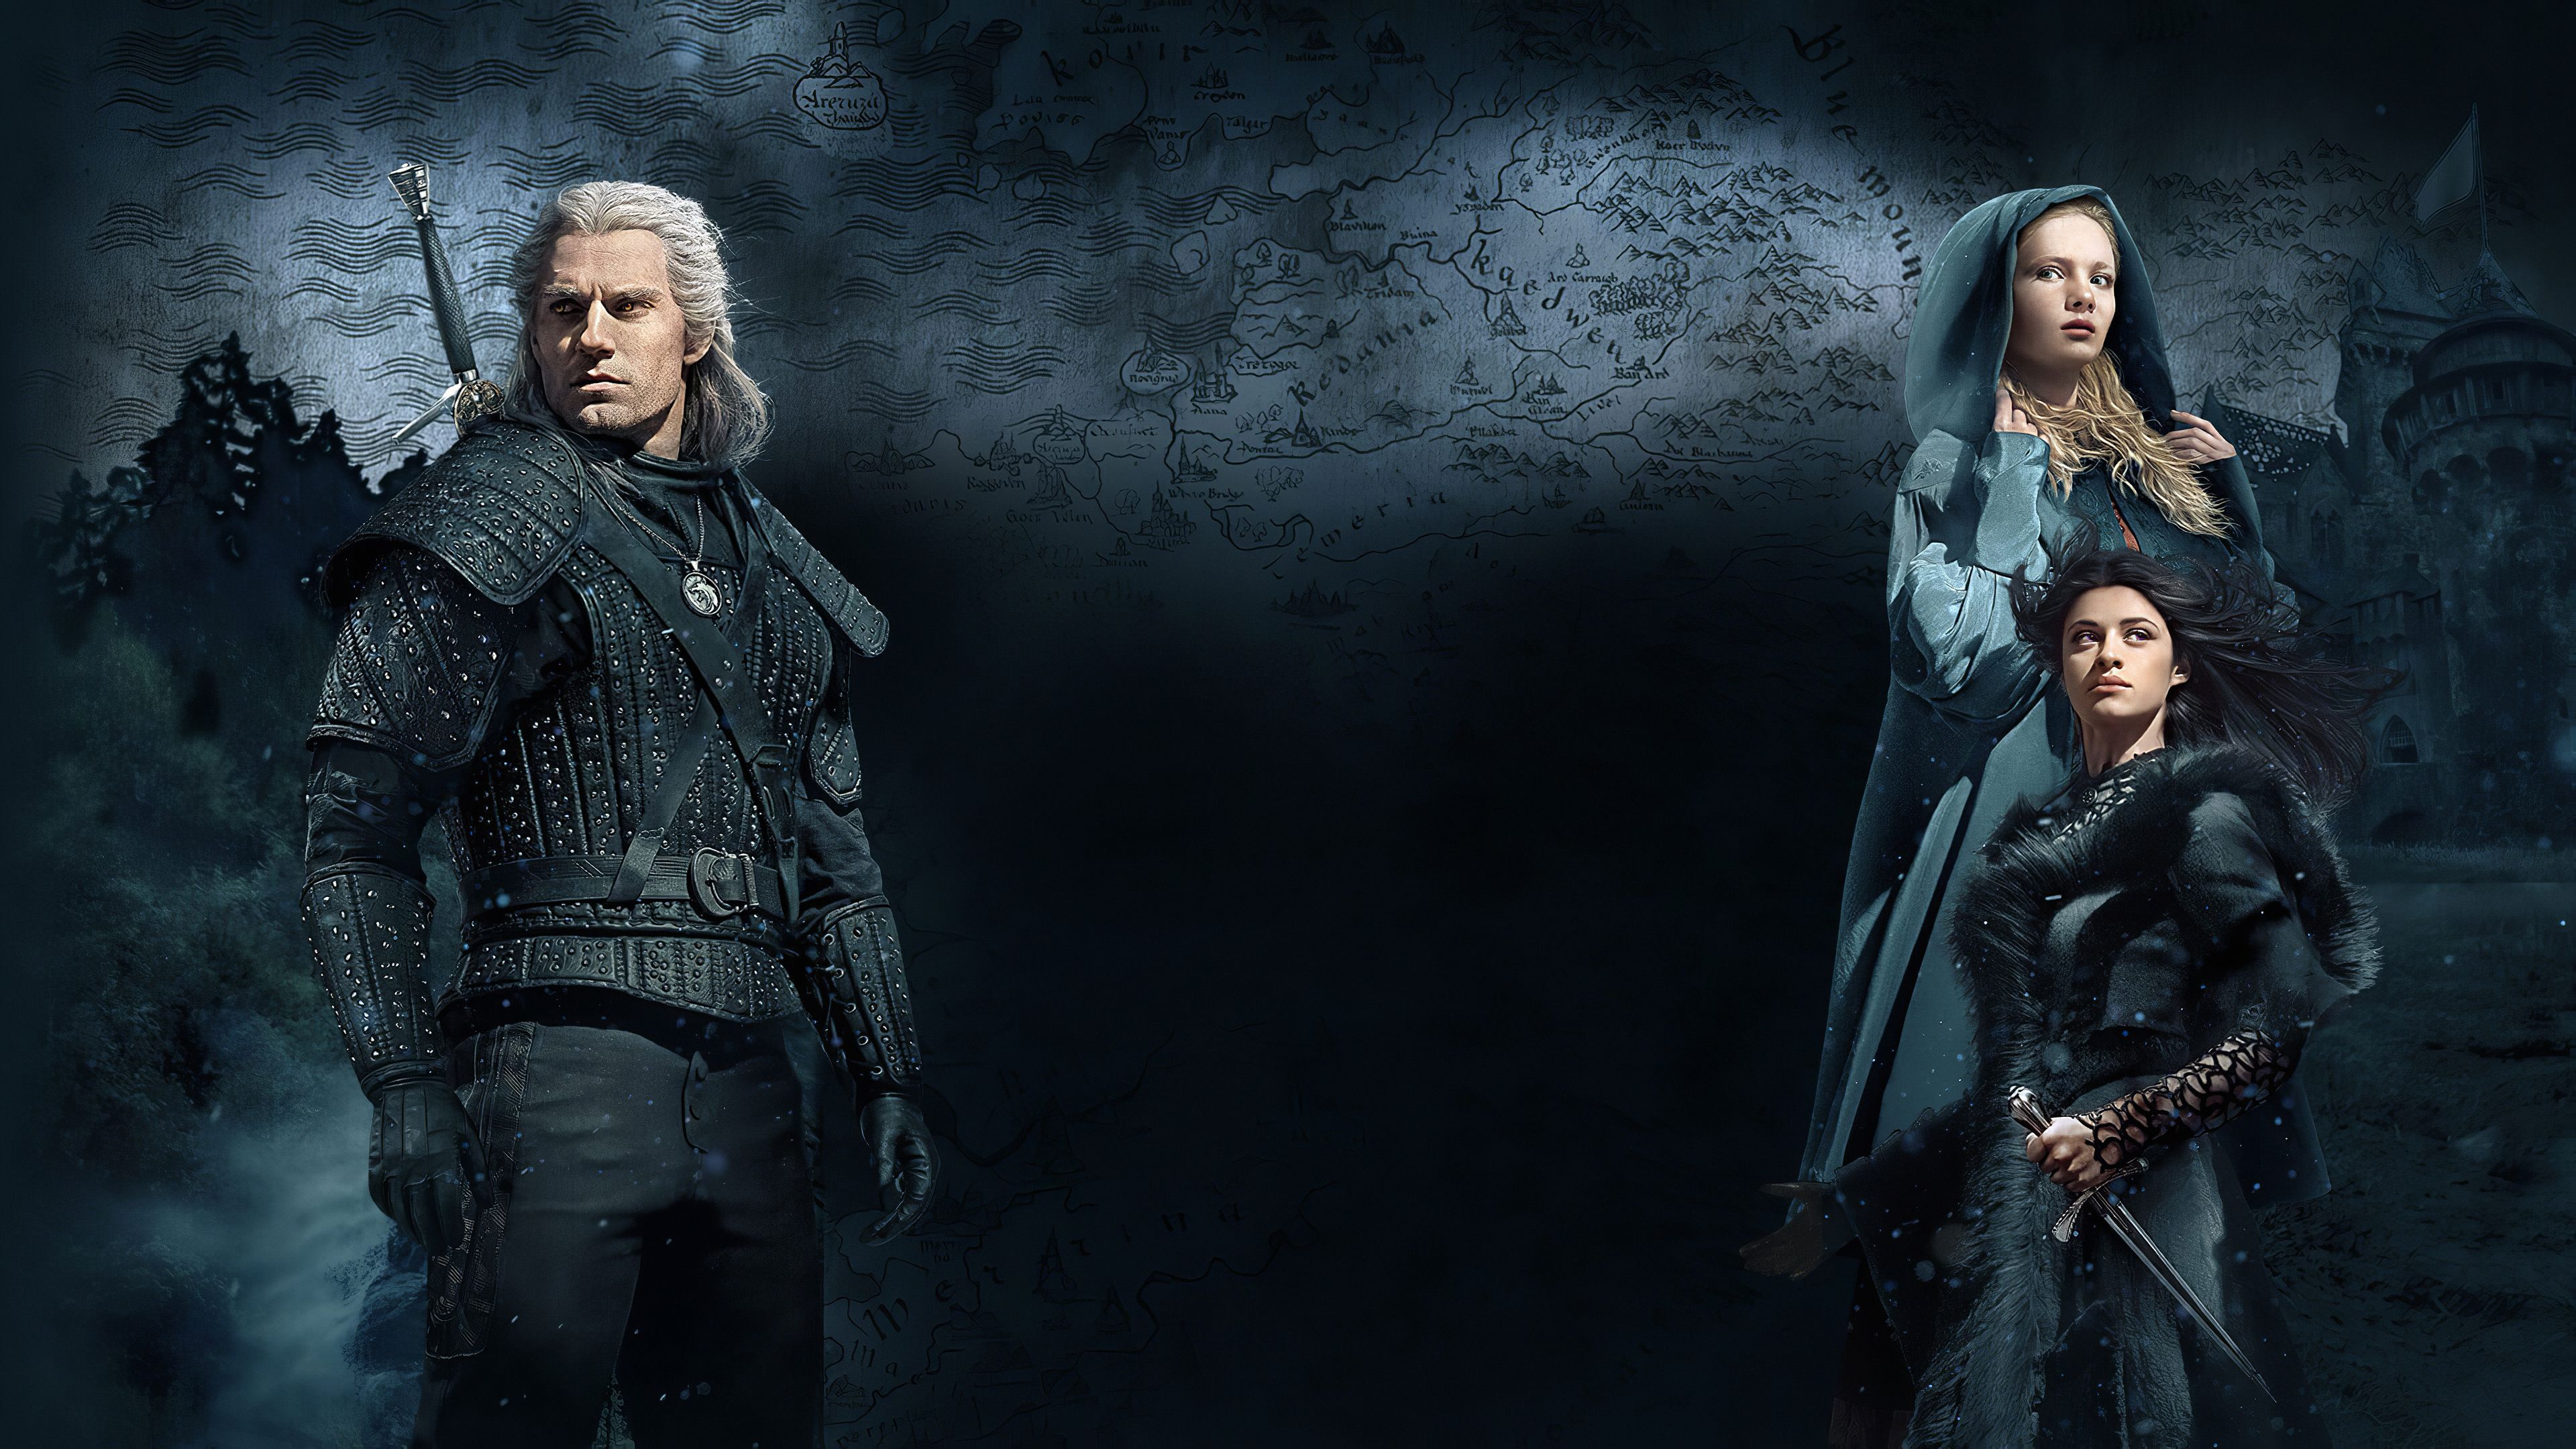 The Witcher 2020 4k, HD Tv Shows, 4k Wallpaper, Image